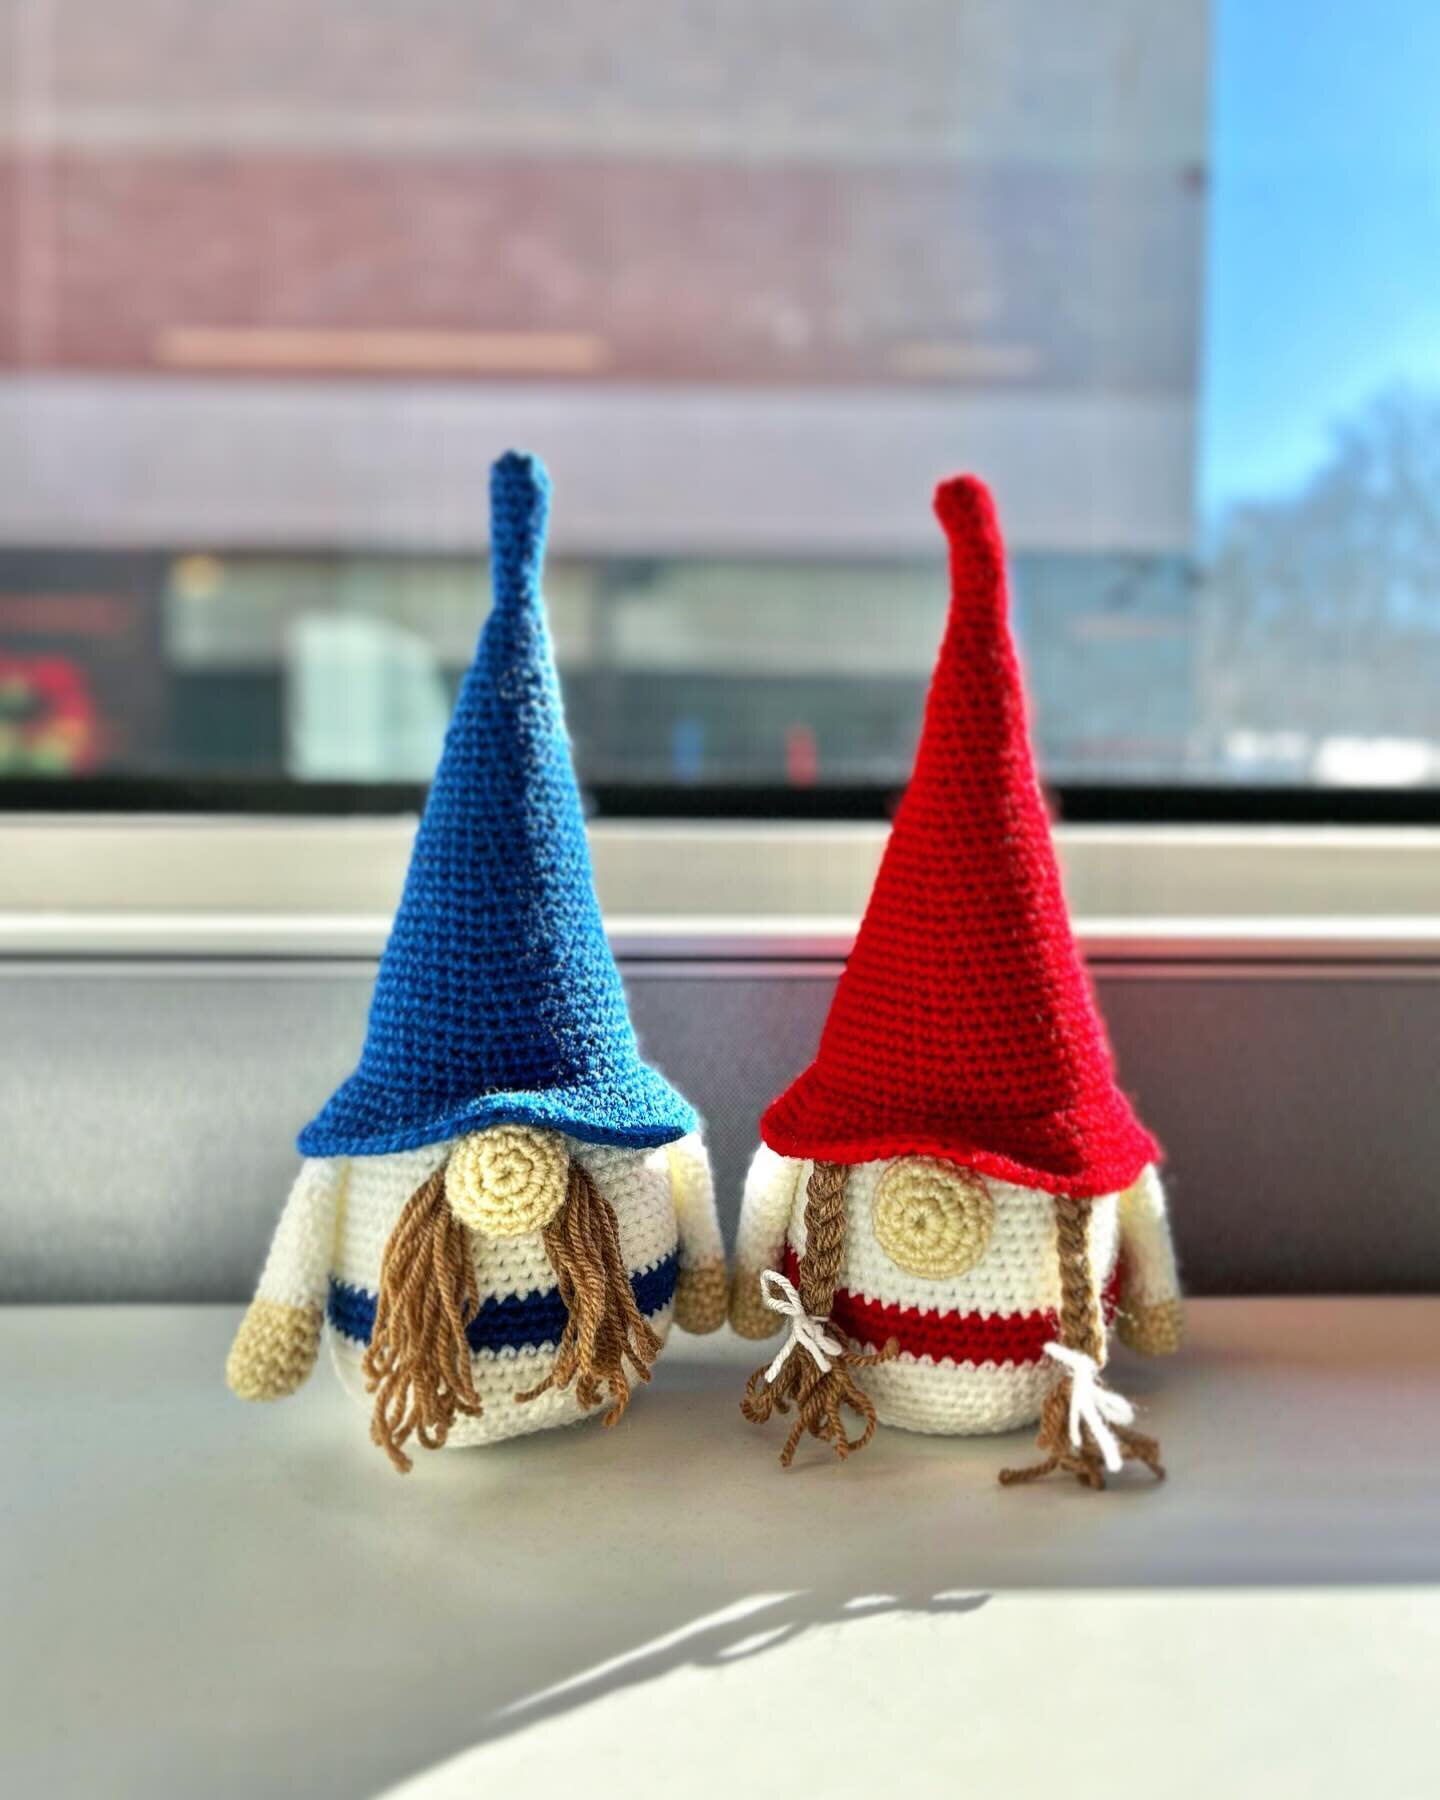 Keep forgetting to post these custom gnomes! First one with a mustache 🥸 and I think it looks so fun.
.
.
.
#Handmade #Crochet #Gnome #Gonk #OldLadyStatus